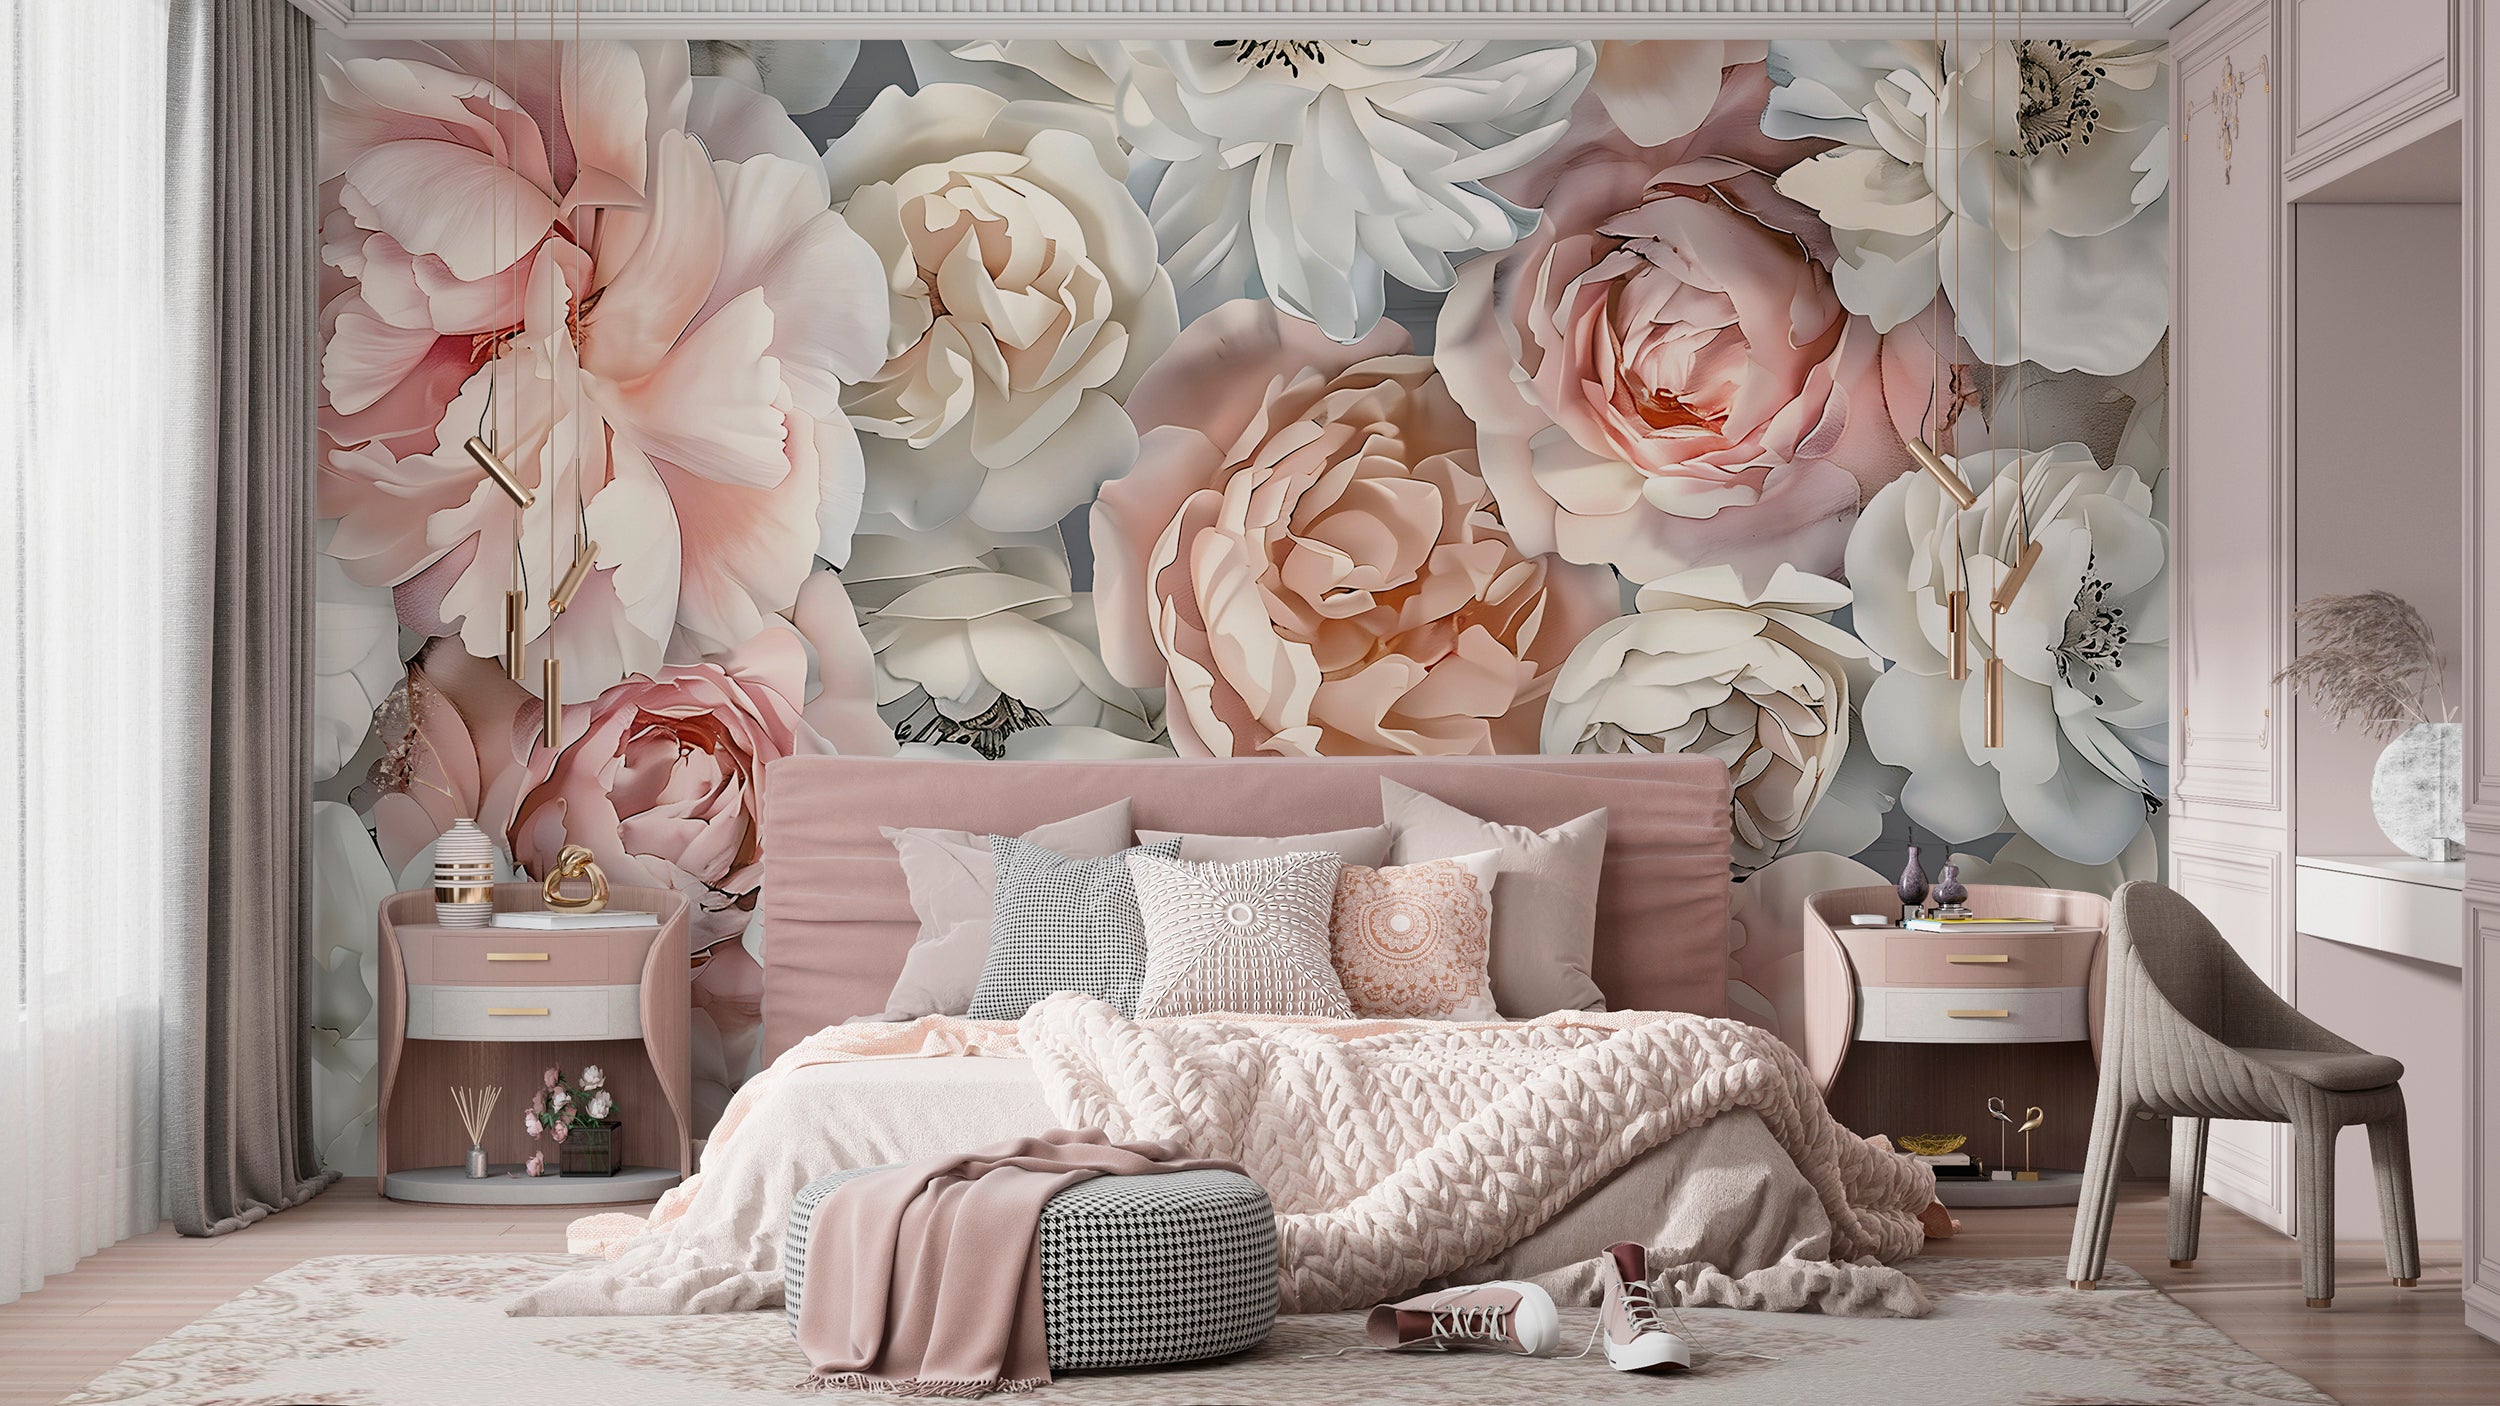 Large Peonies Wall Mural, Watercolor Pastel Pink and White Floral Wallpaper, Removable Peony Wall Decor, Unique Custom Size Botanical Art